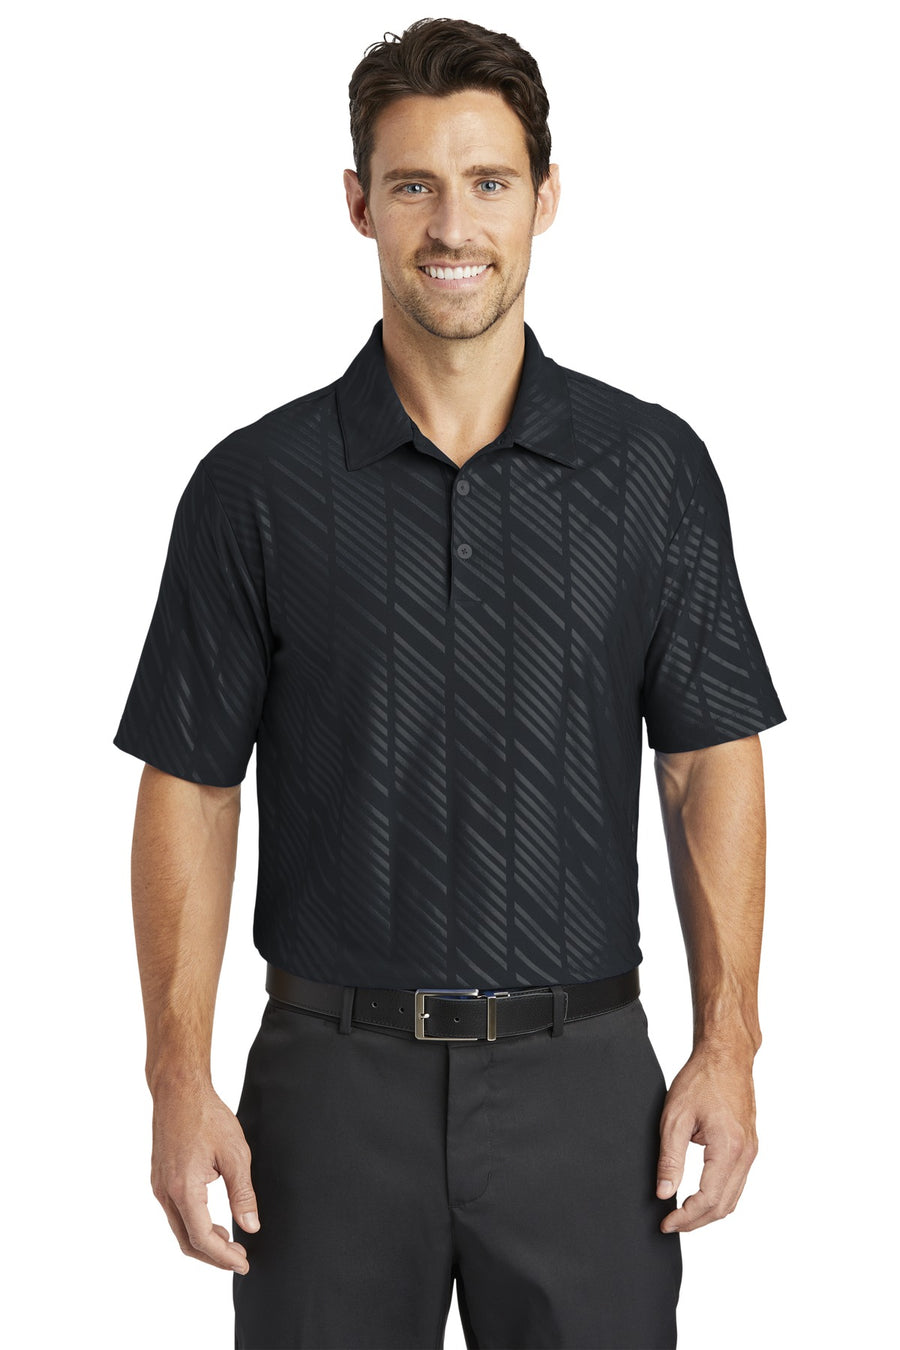 DISCONTINUED Nike Dri-FIT Embossed Polo.